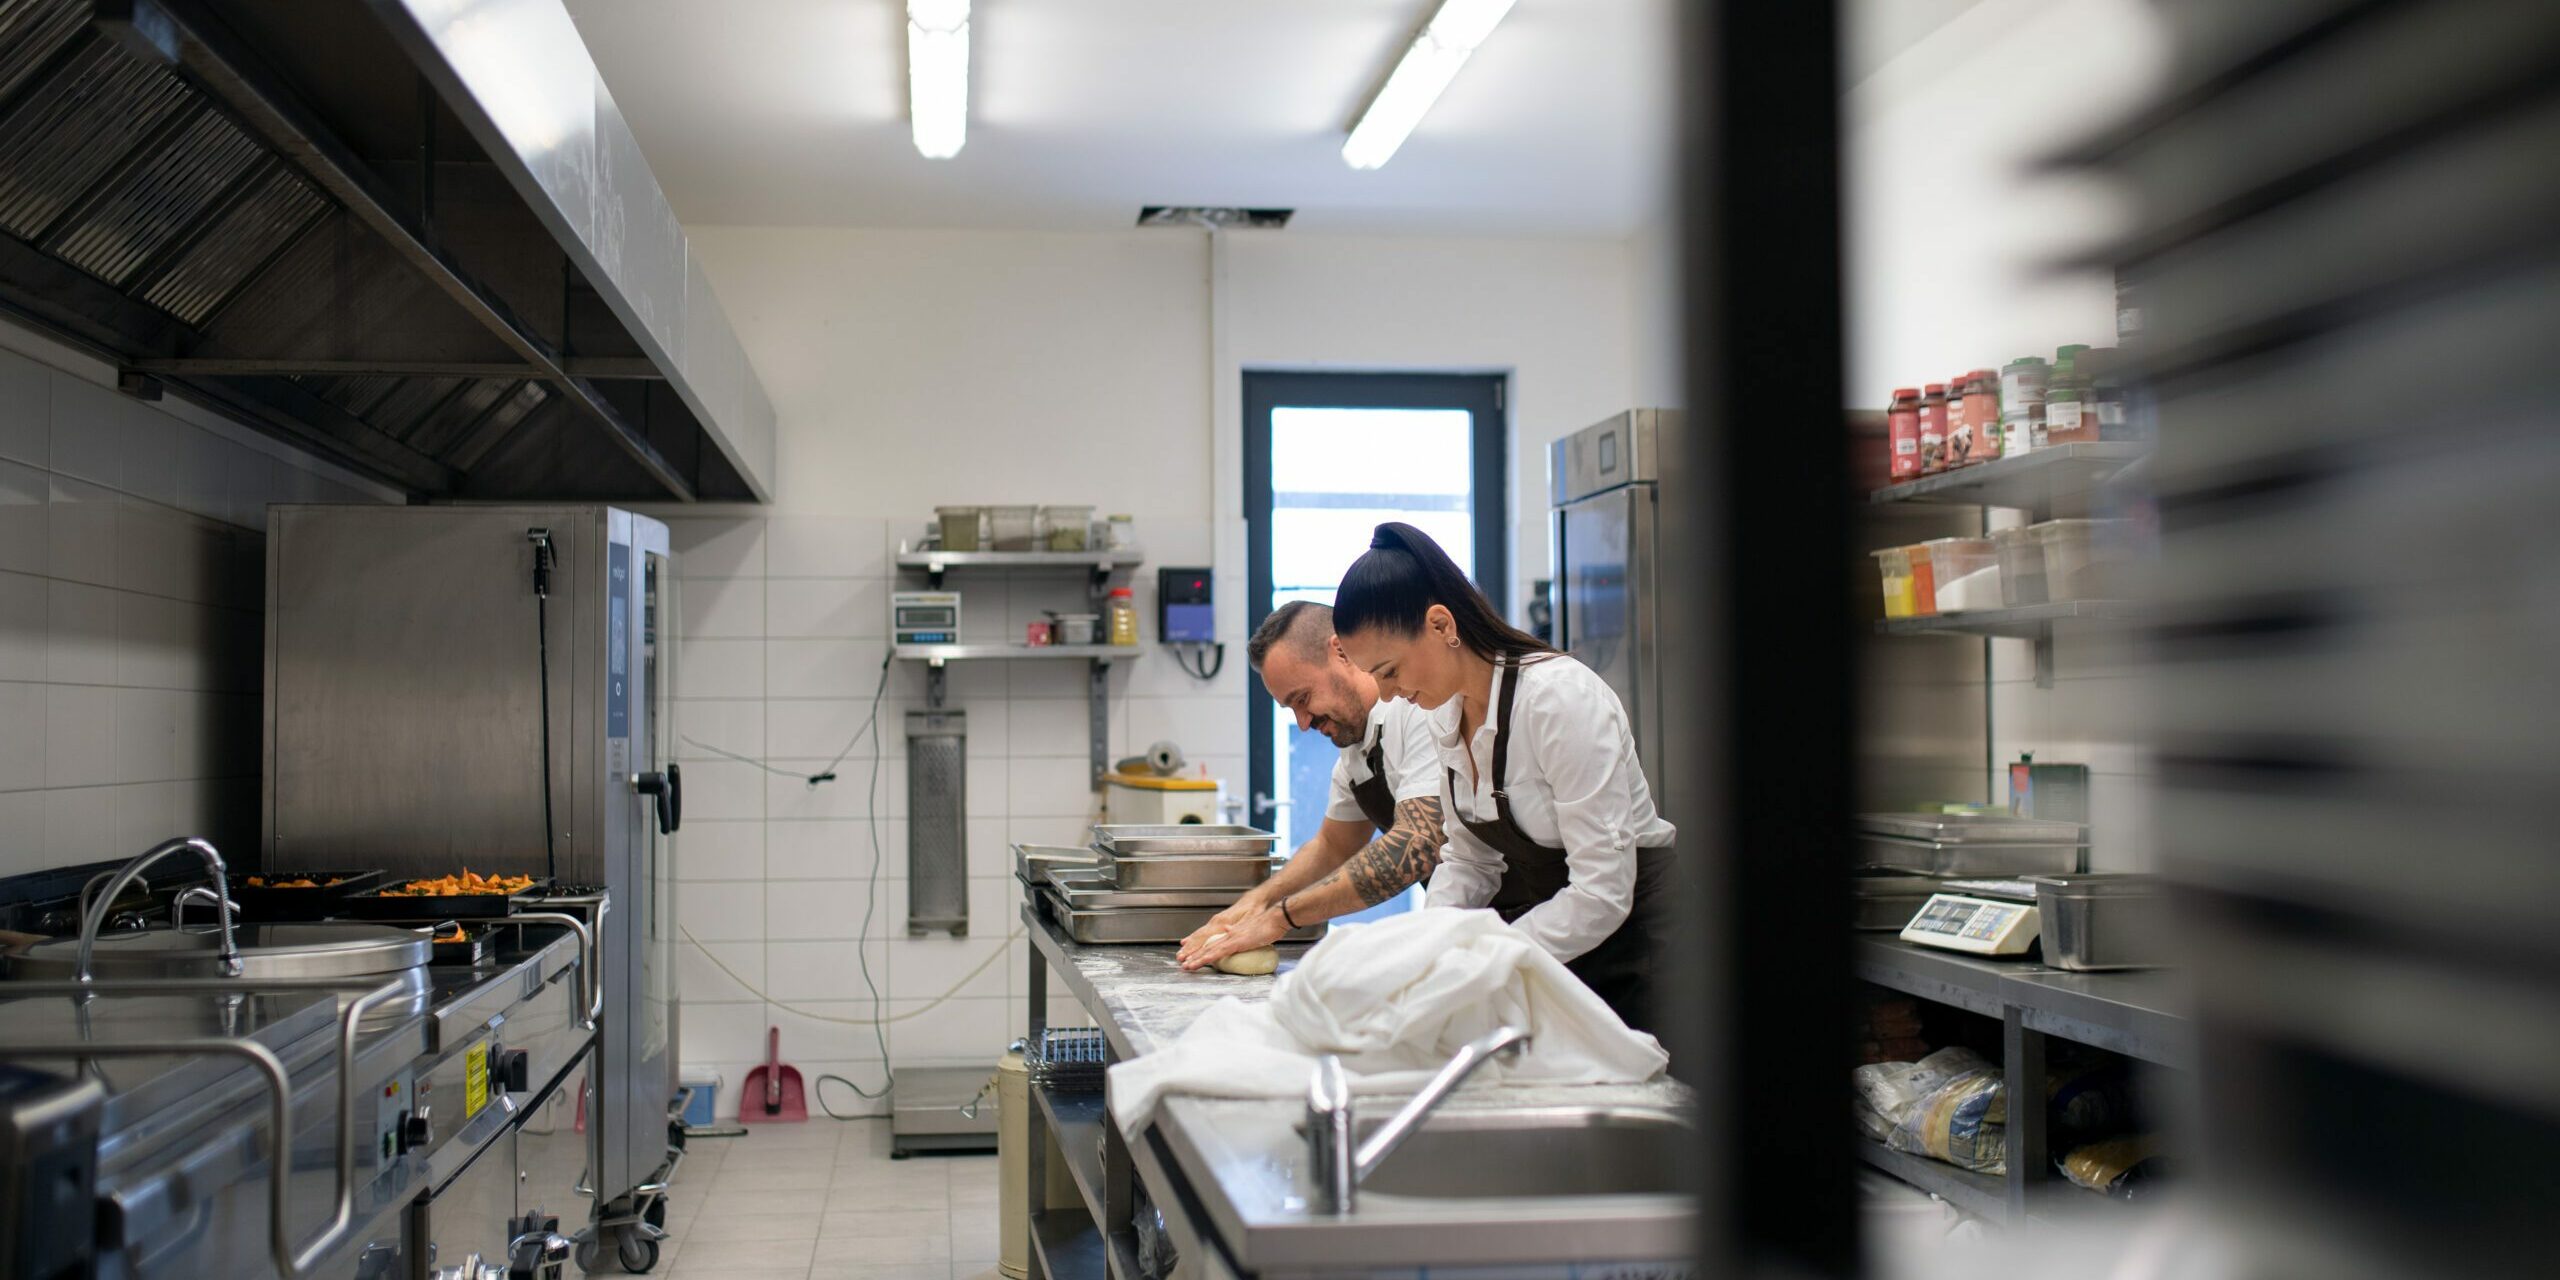 A chef and cook working on their dishes indoors in restaurant kitchen.